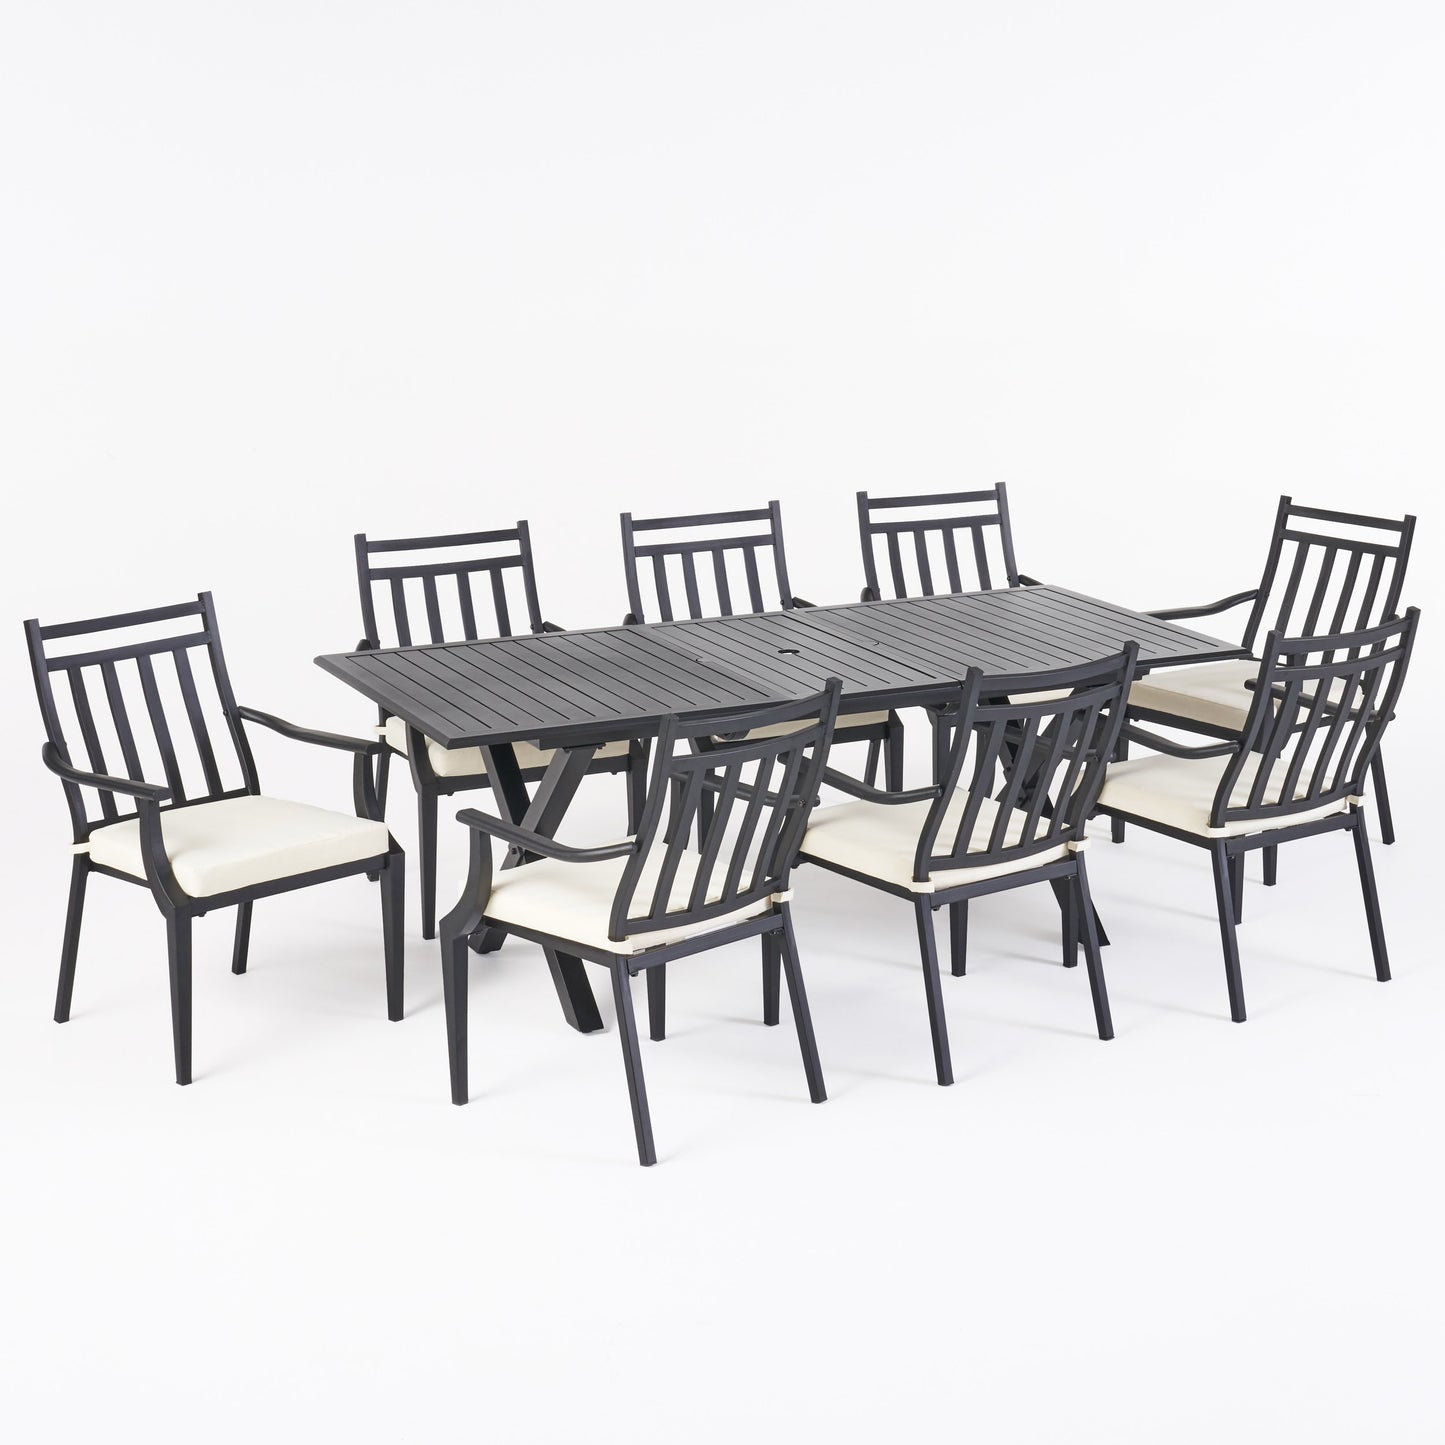 Olive Outdoor 9 Piece Dining Set with Expandable Table